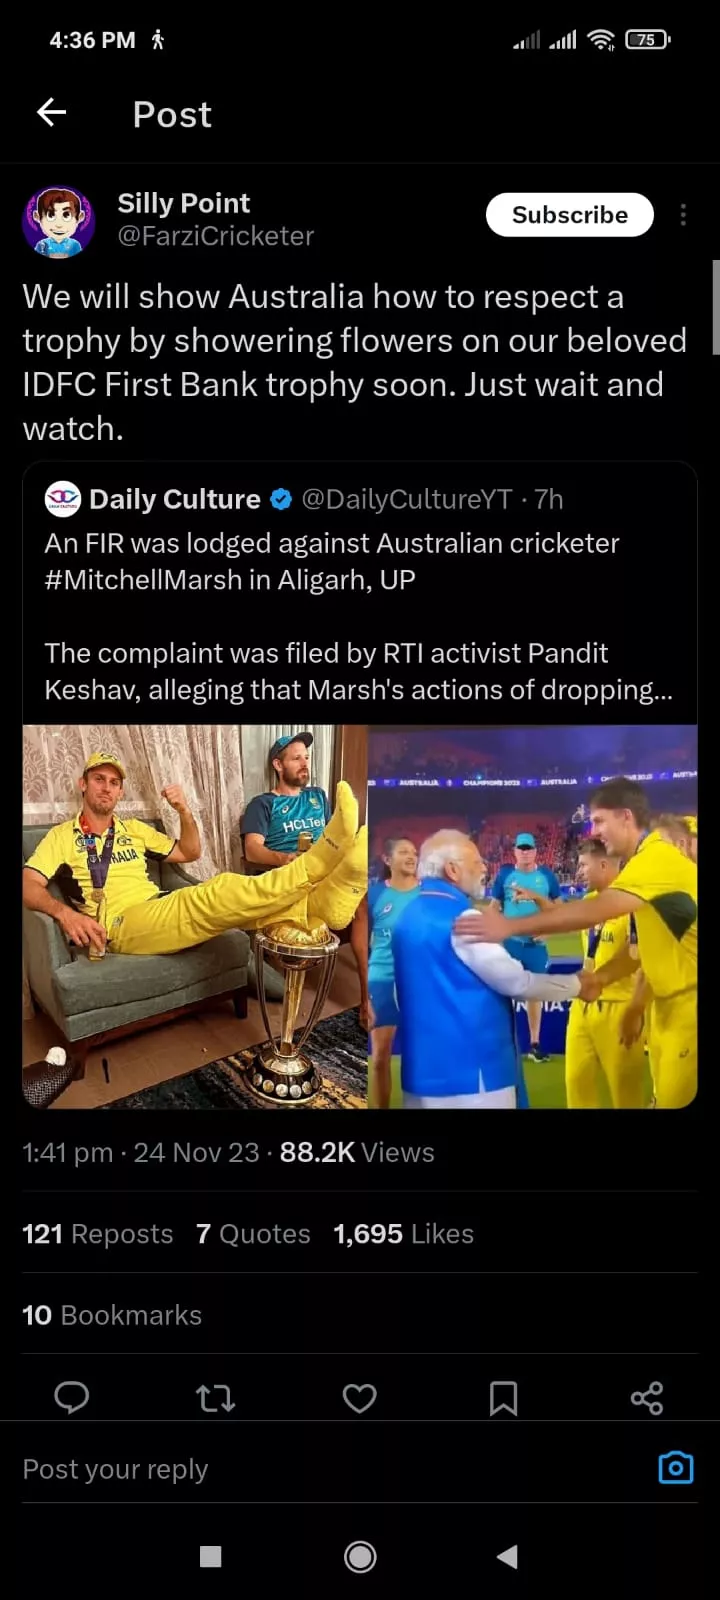 Fans Troll The Indian Activist Who Filed Fir Against Mitchell Marsh; Asks PM Modi To Ban Marsh